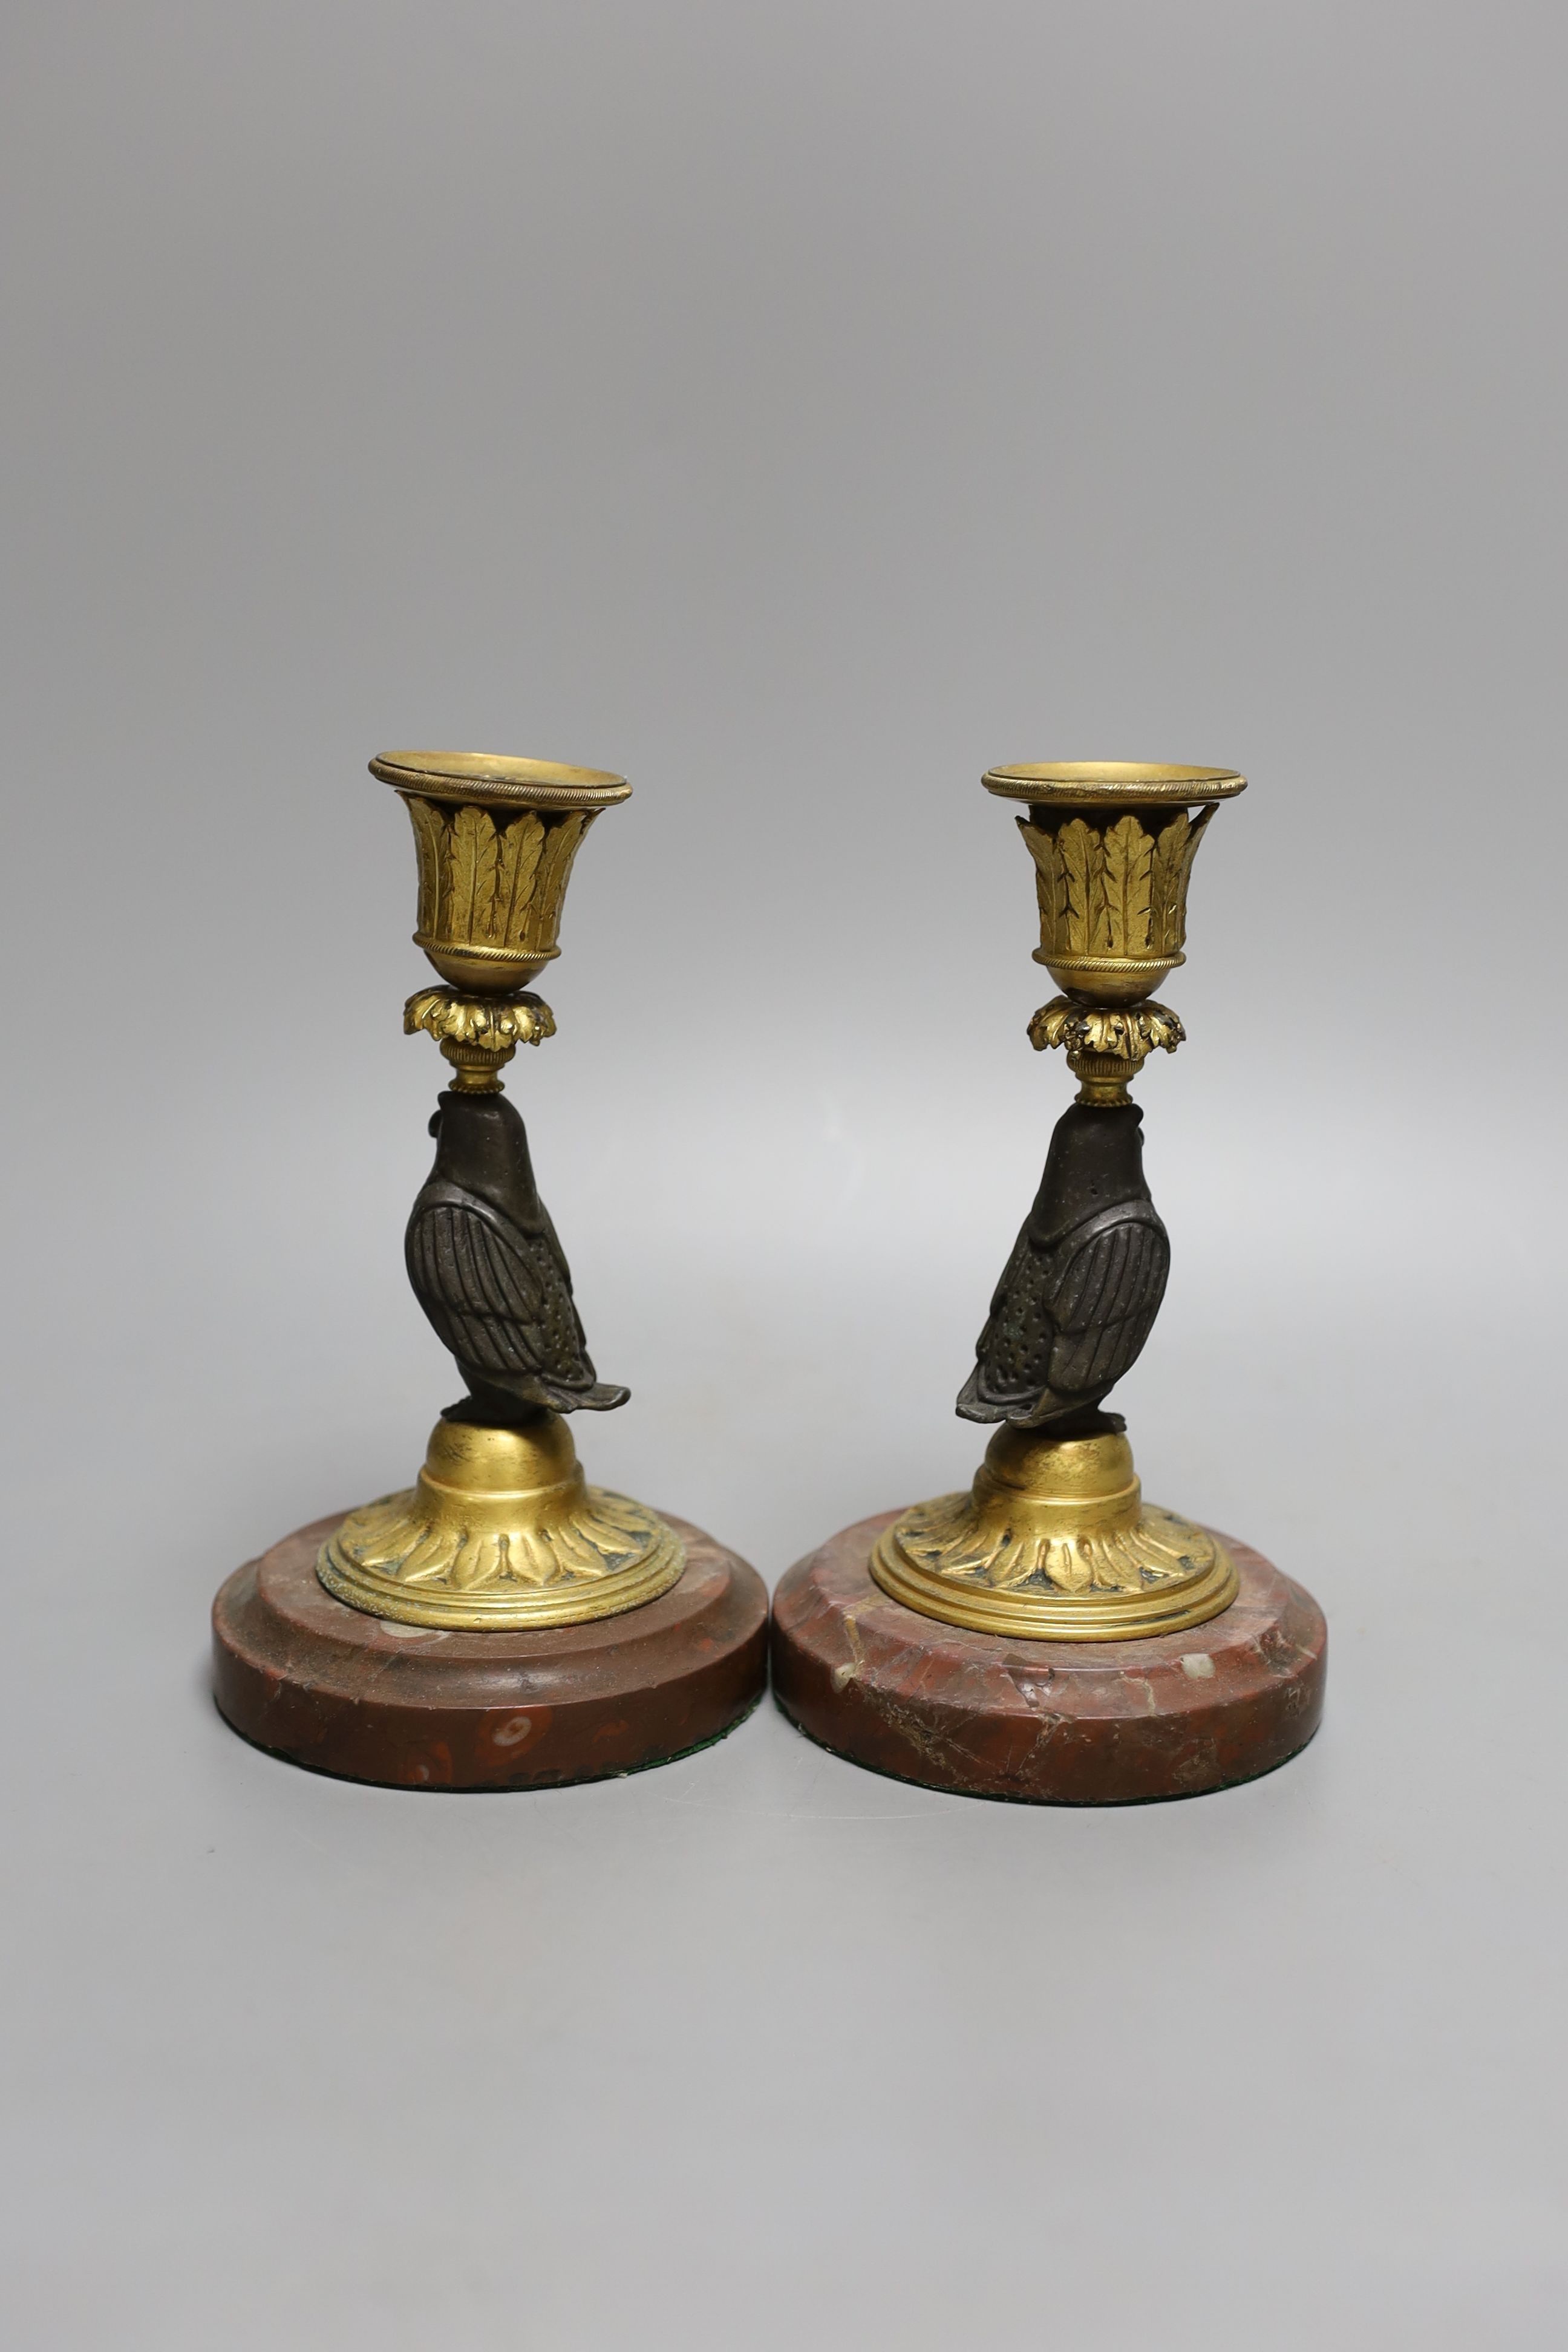 A pair of bronze and ormolu owl candlesticks - 16.5cm tall - Image 2 of 3